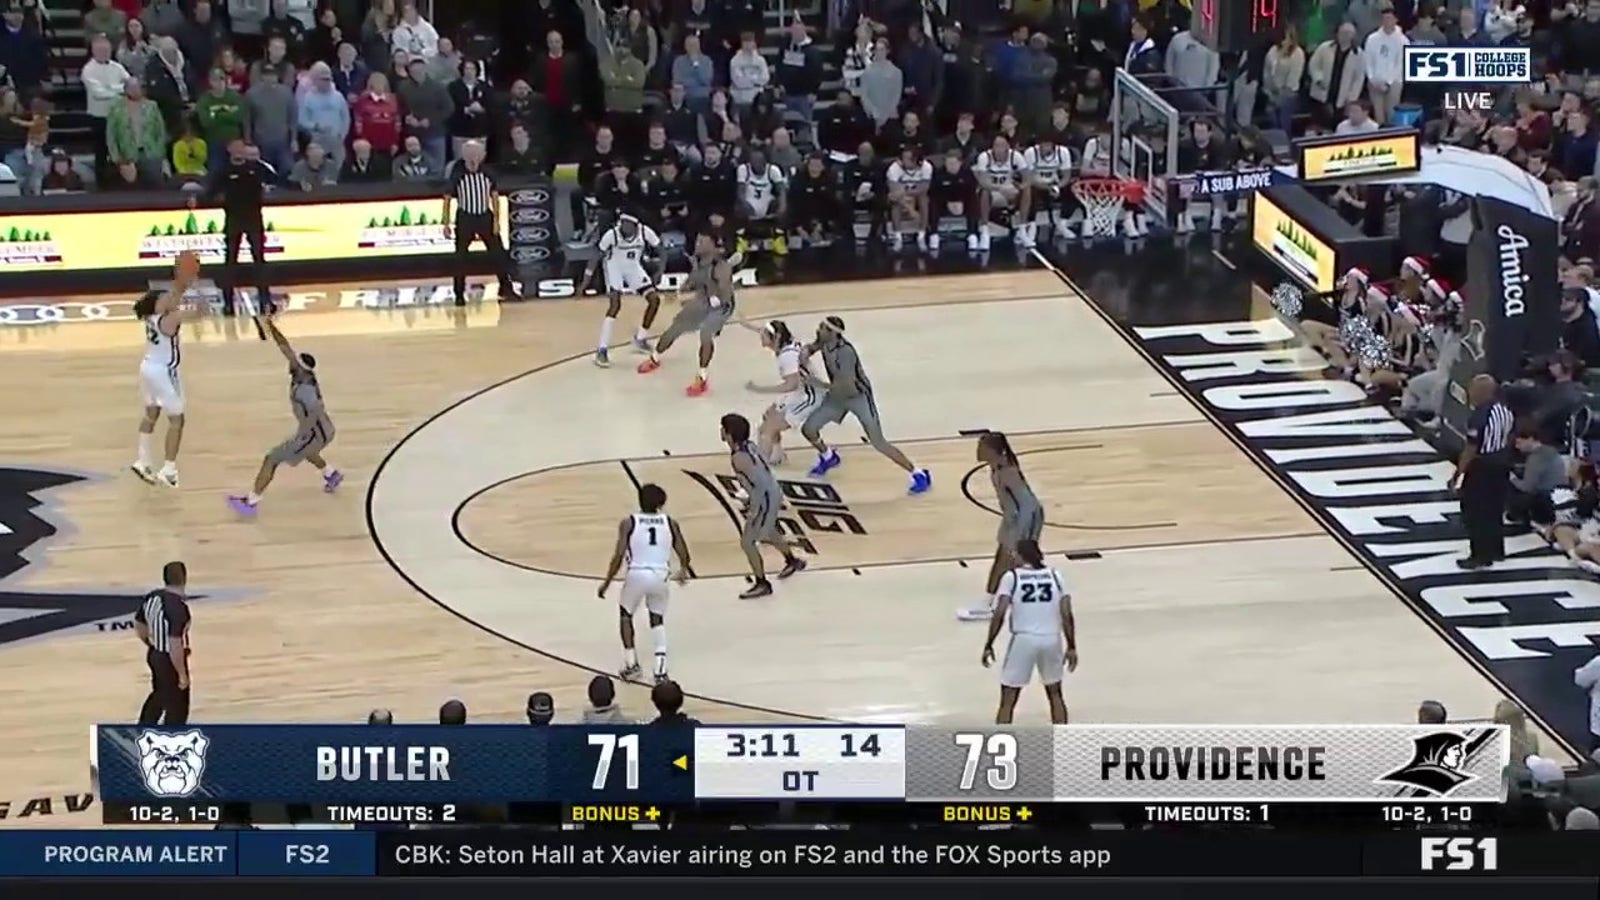 Devin Carter nails two 3-pointers in OT to seal Providence's 85-75 win over Butler